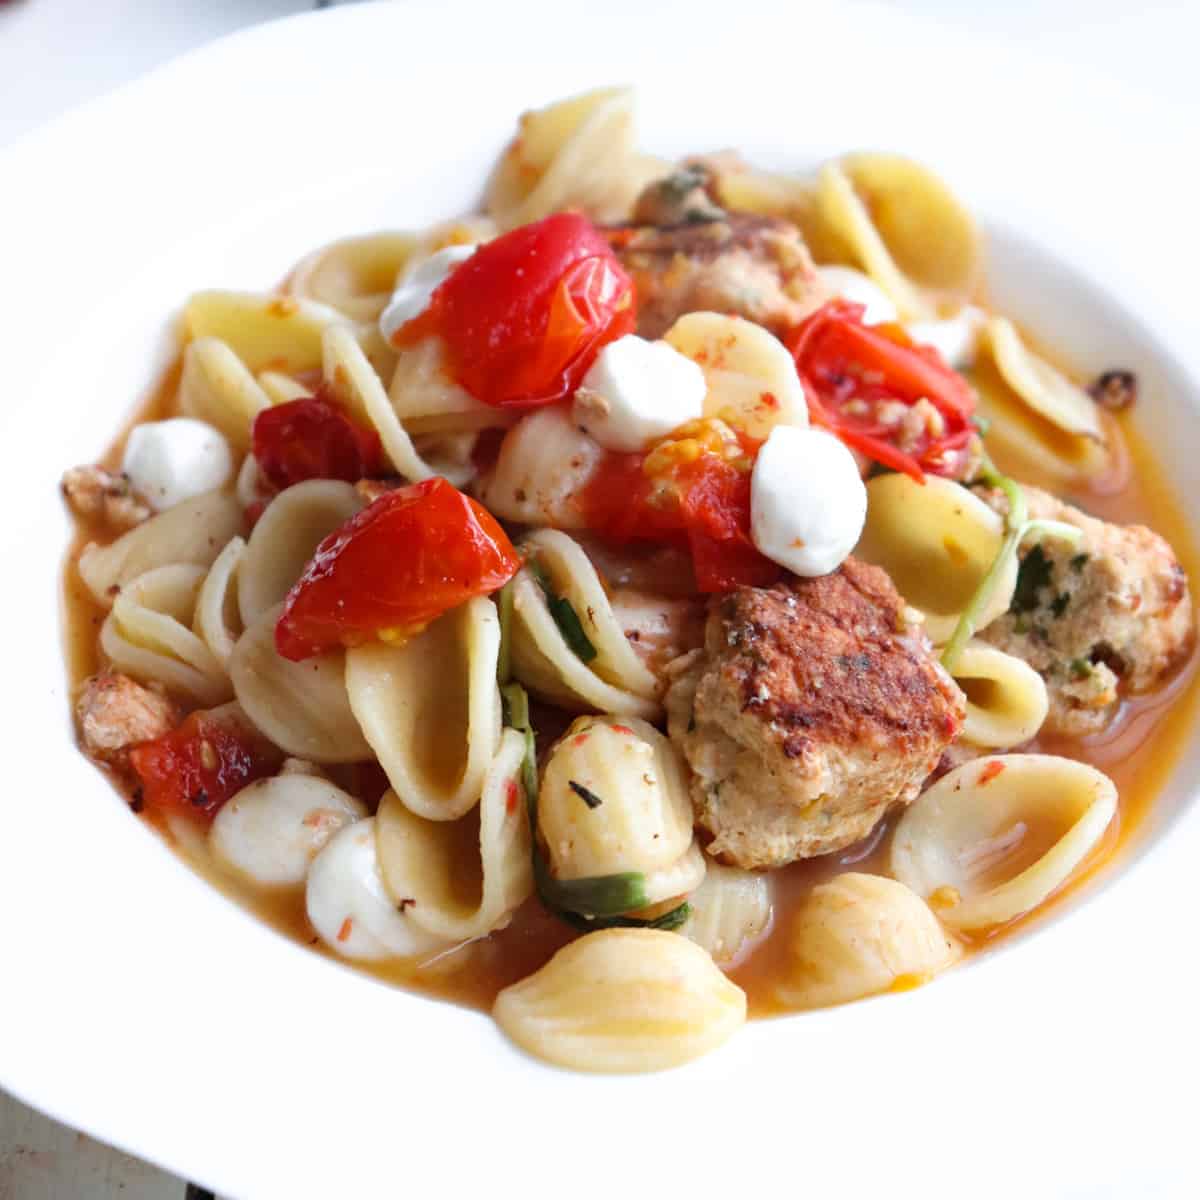 orecchiette pasta with baby chicken meatballs plated